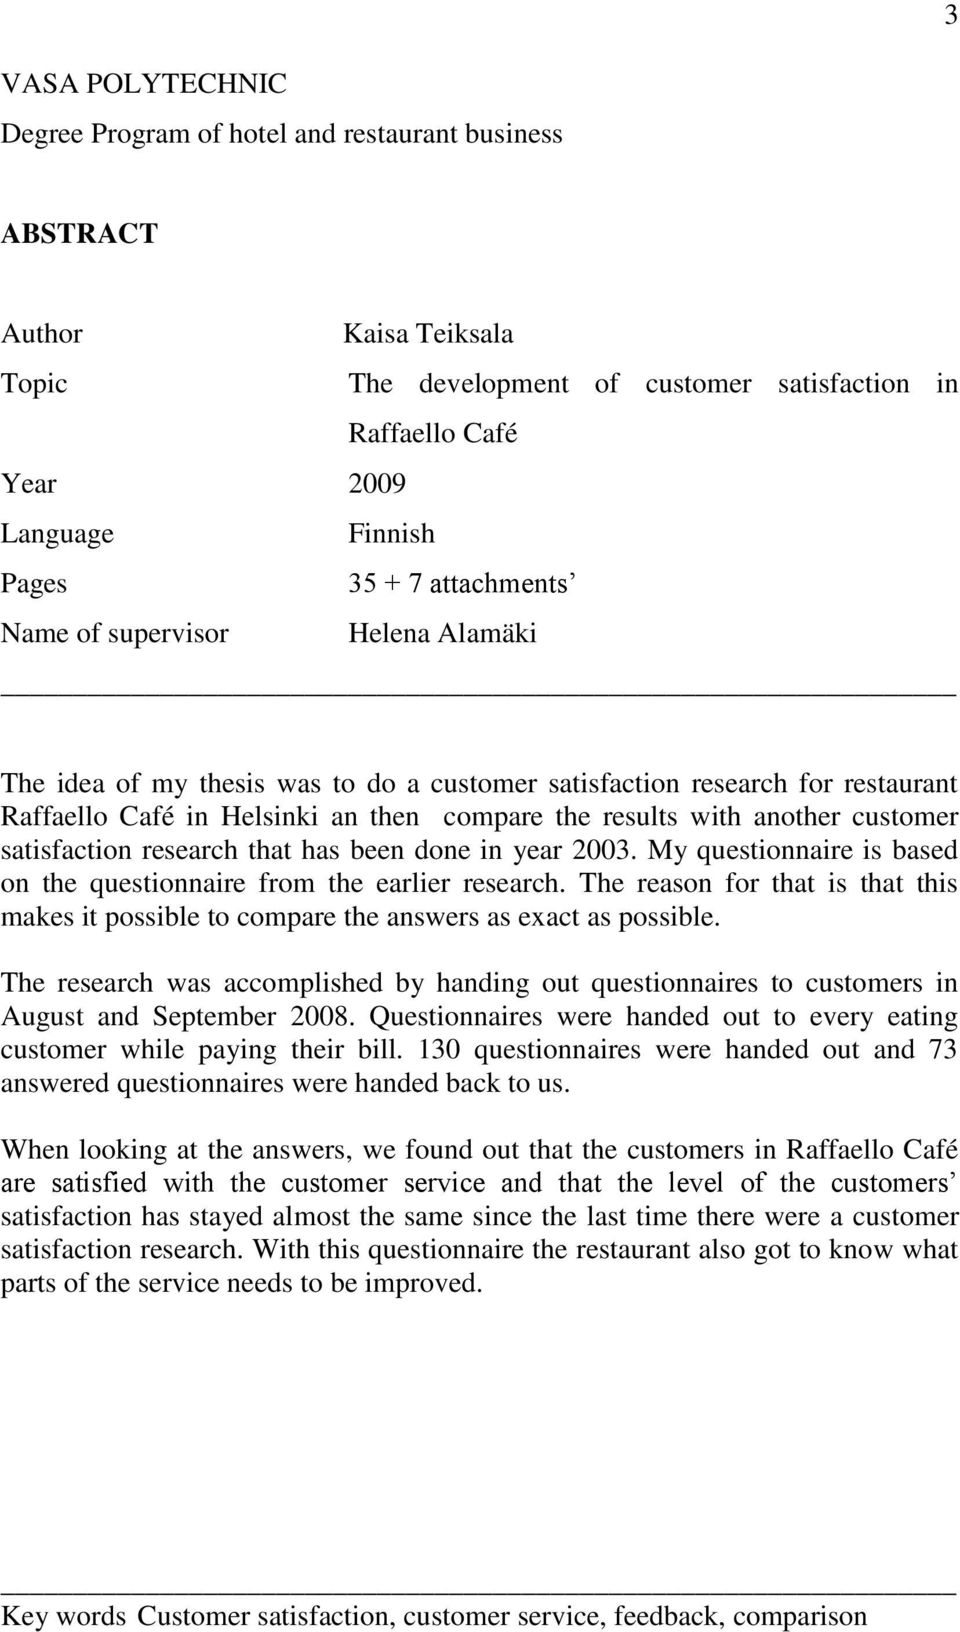 customer satisfaction research that has been done in year 2003. My questionnaire is based on the questionnaire from the earlier research.